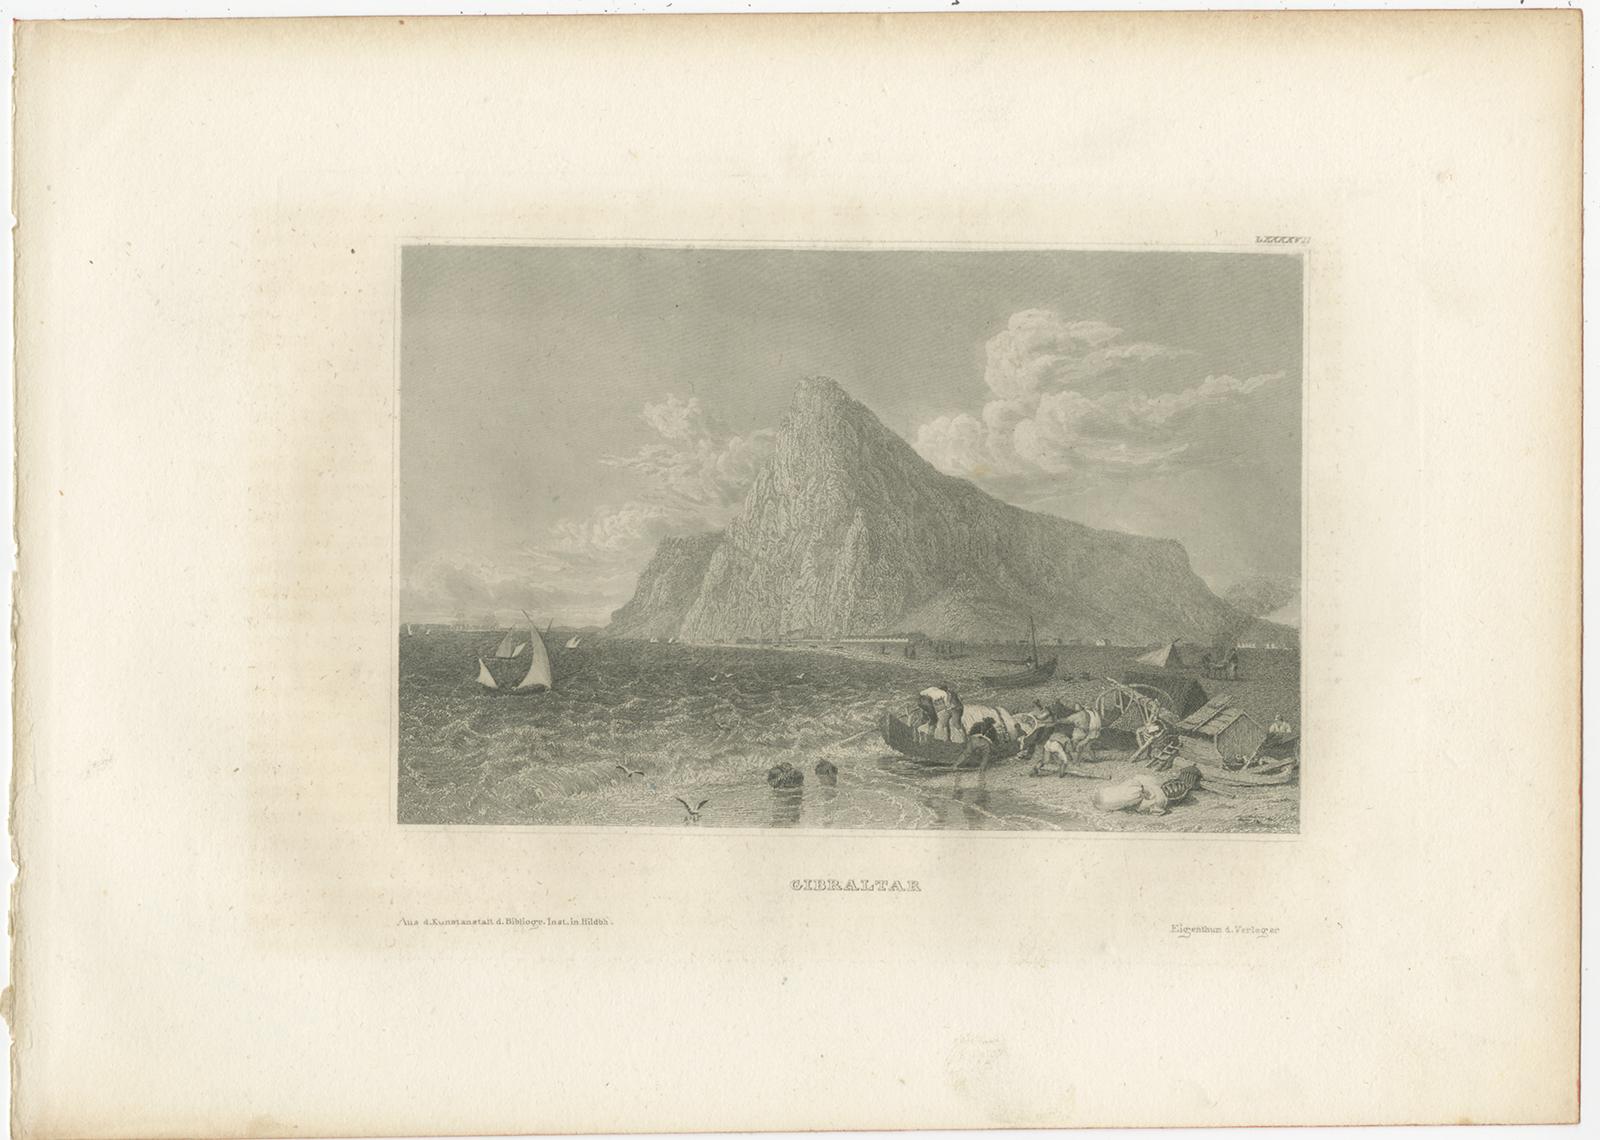 Antique print titled 'Gibraltar'. View of the rock of Gibraltar. Originates from 'Meyers Universum'. Published circa 1840. 

Joseph Meyer (May 9, 1796 - June 27, 1856) was a German industrialist and publisher, most noted for his encyclopedia,